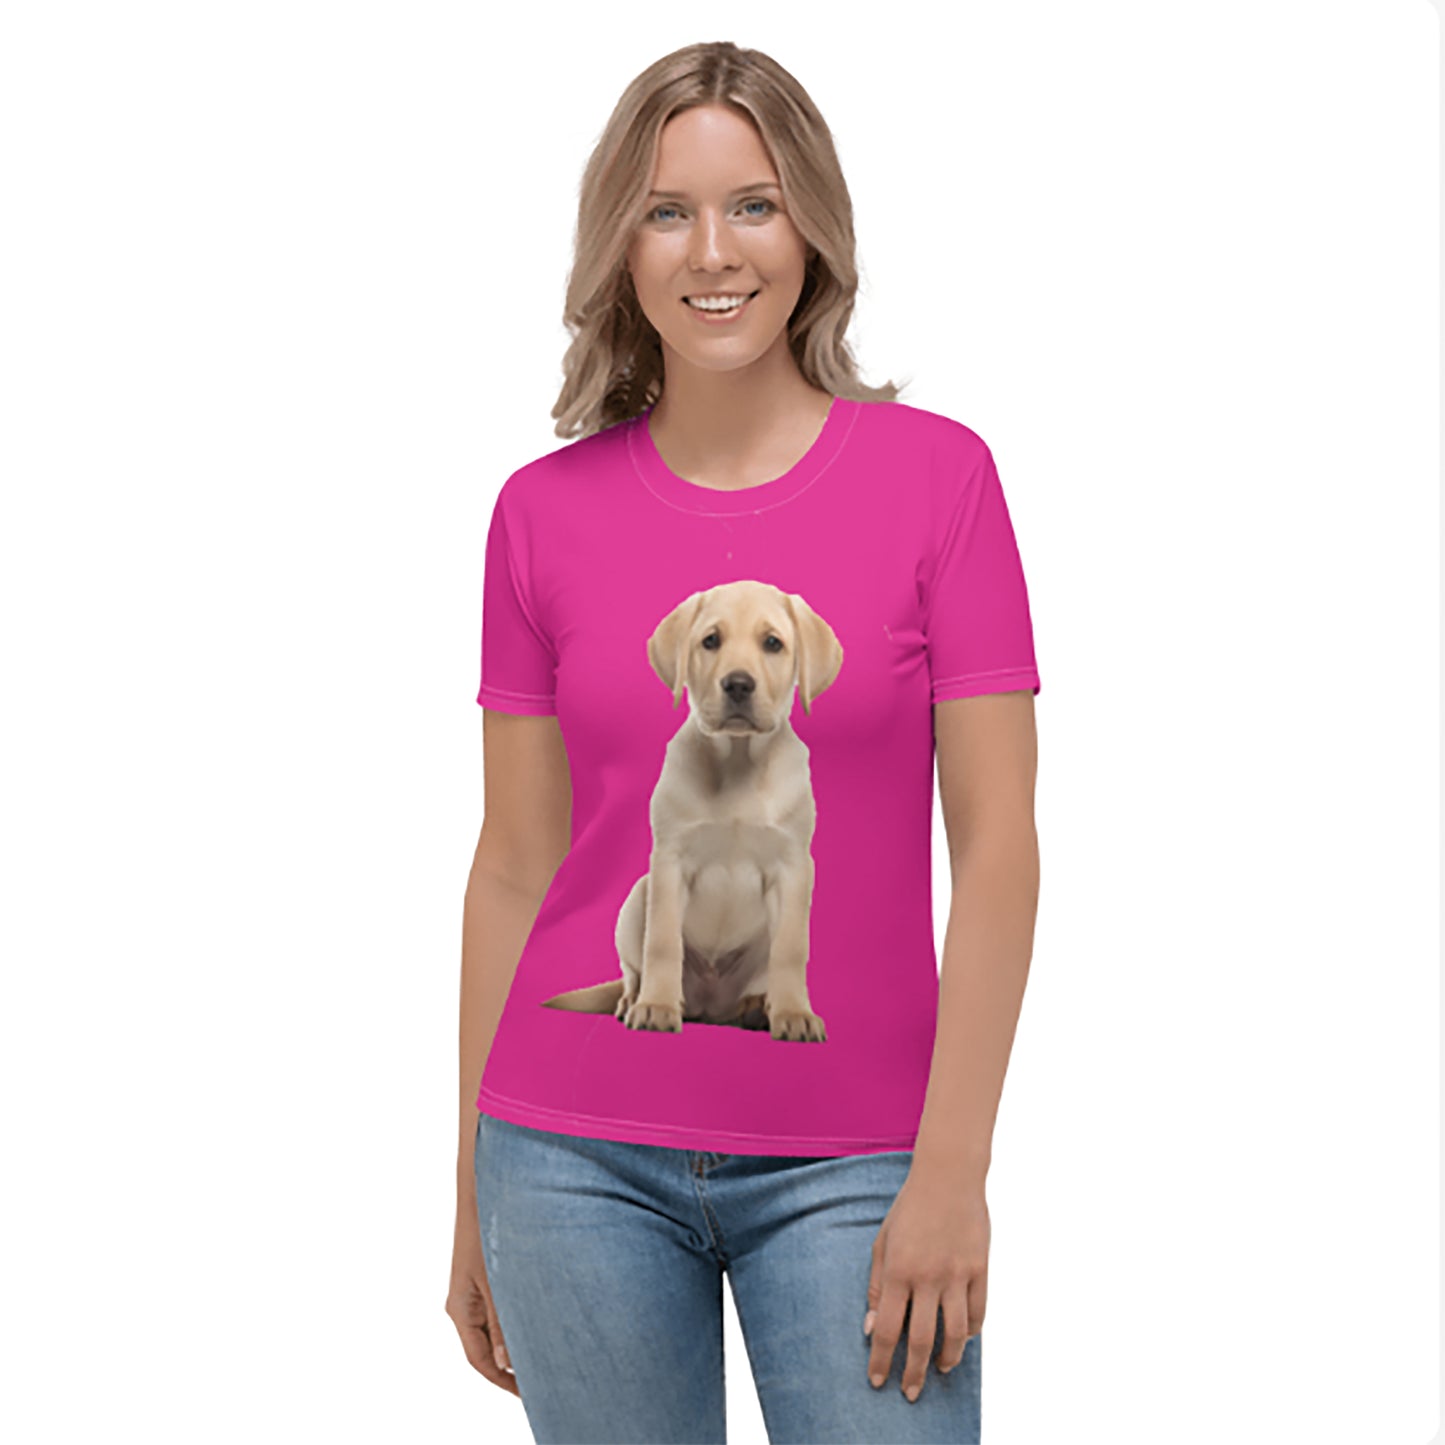 Womens T-Shirt printed with a Labrador Puppy on Barbi Doll Pink